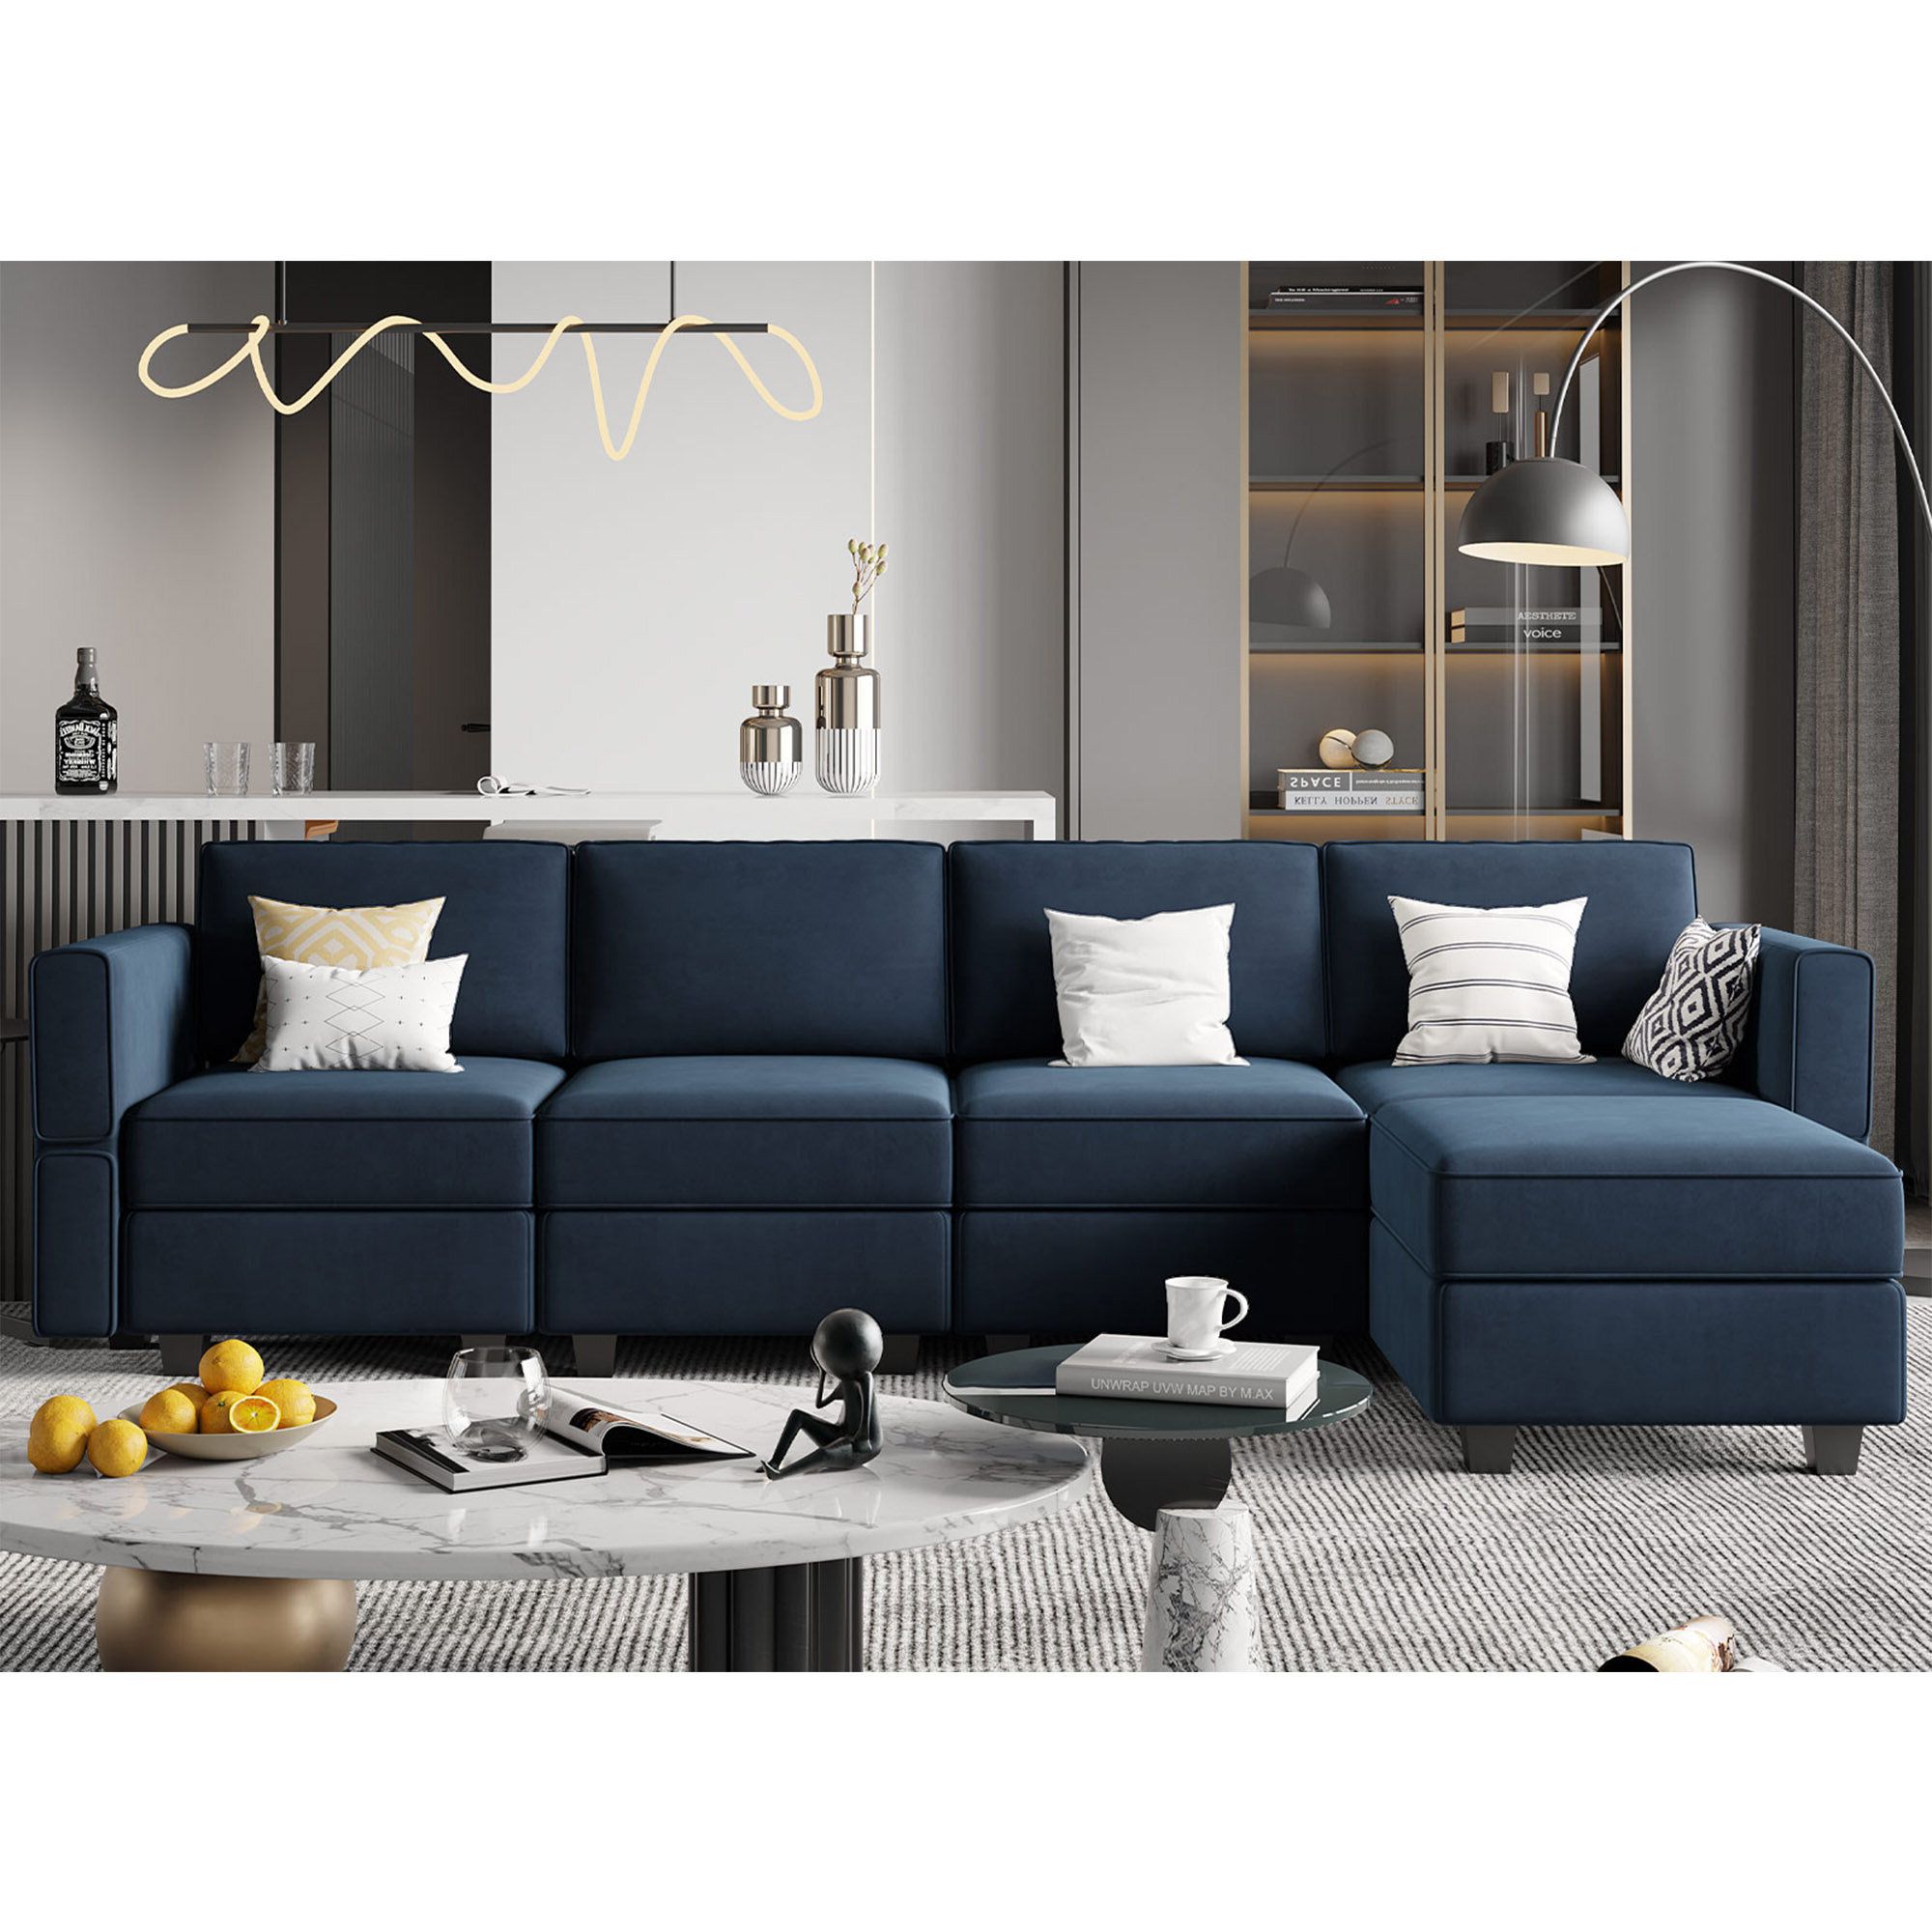 Latitude Run® Teangela 116.6'' Upholstered Sectional Sofa With Storage &  Reviews | Wayfair Within Sectional Sofa With Storage (Gallery 10 of 20)